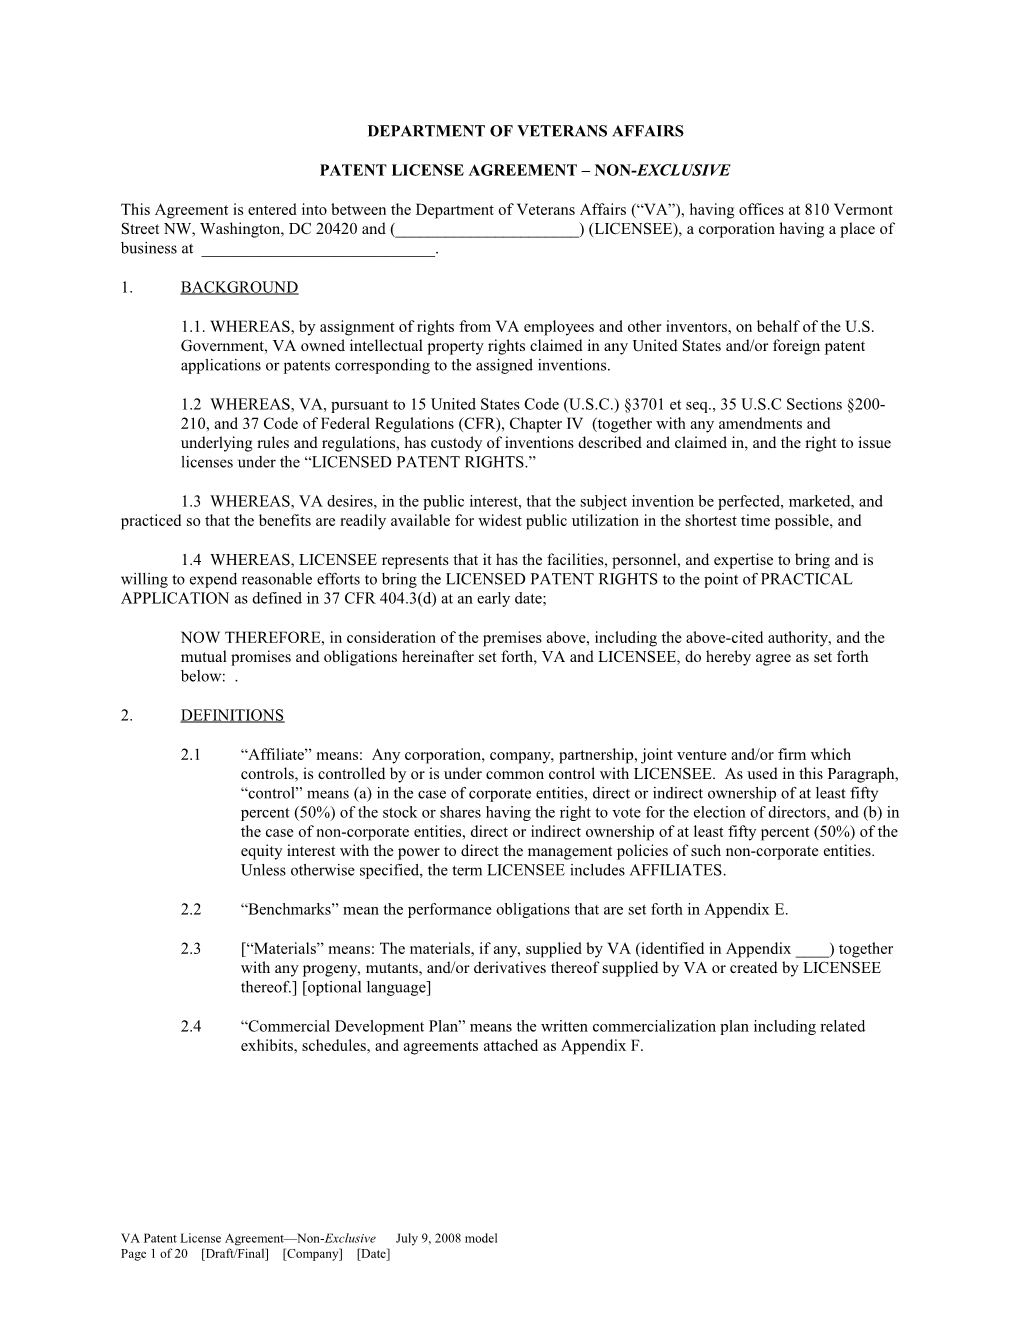 Patent License Agreement Non-Exclusive